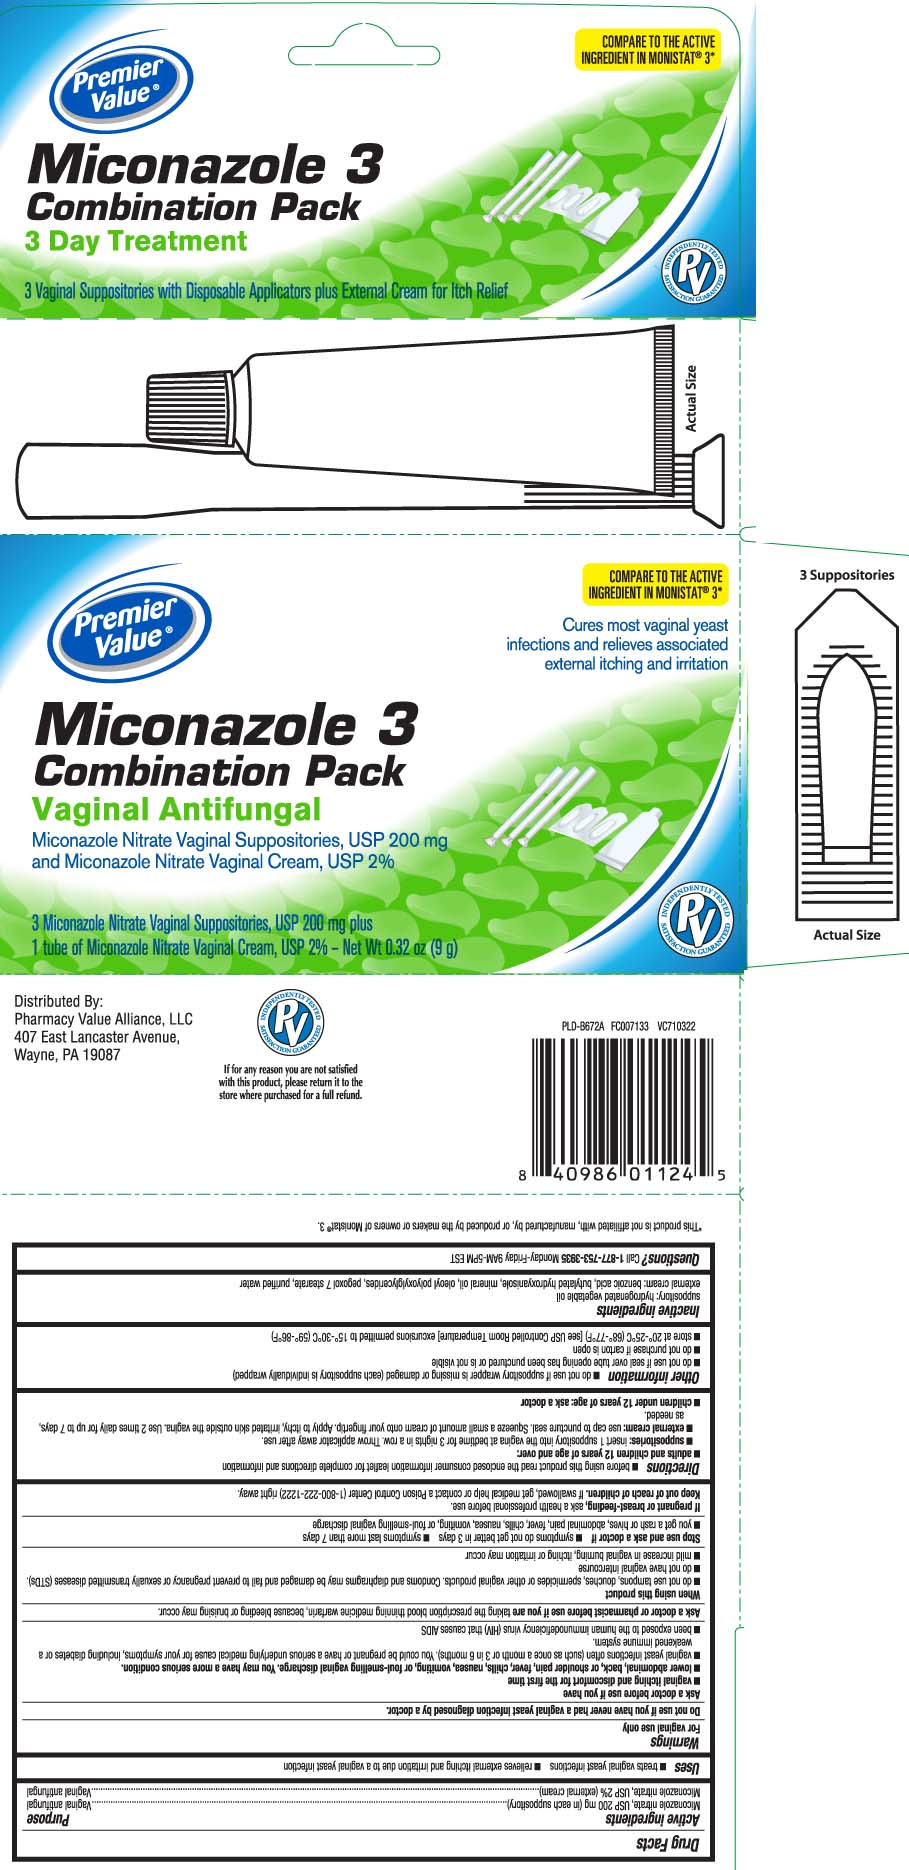 Miconazole nitrate, USP 200 mg (in each suppository) Miconazole nitrate, USP 2% (external cream)